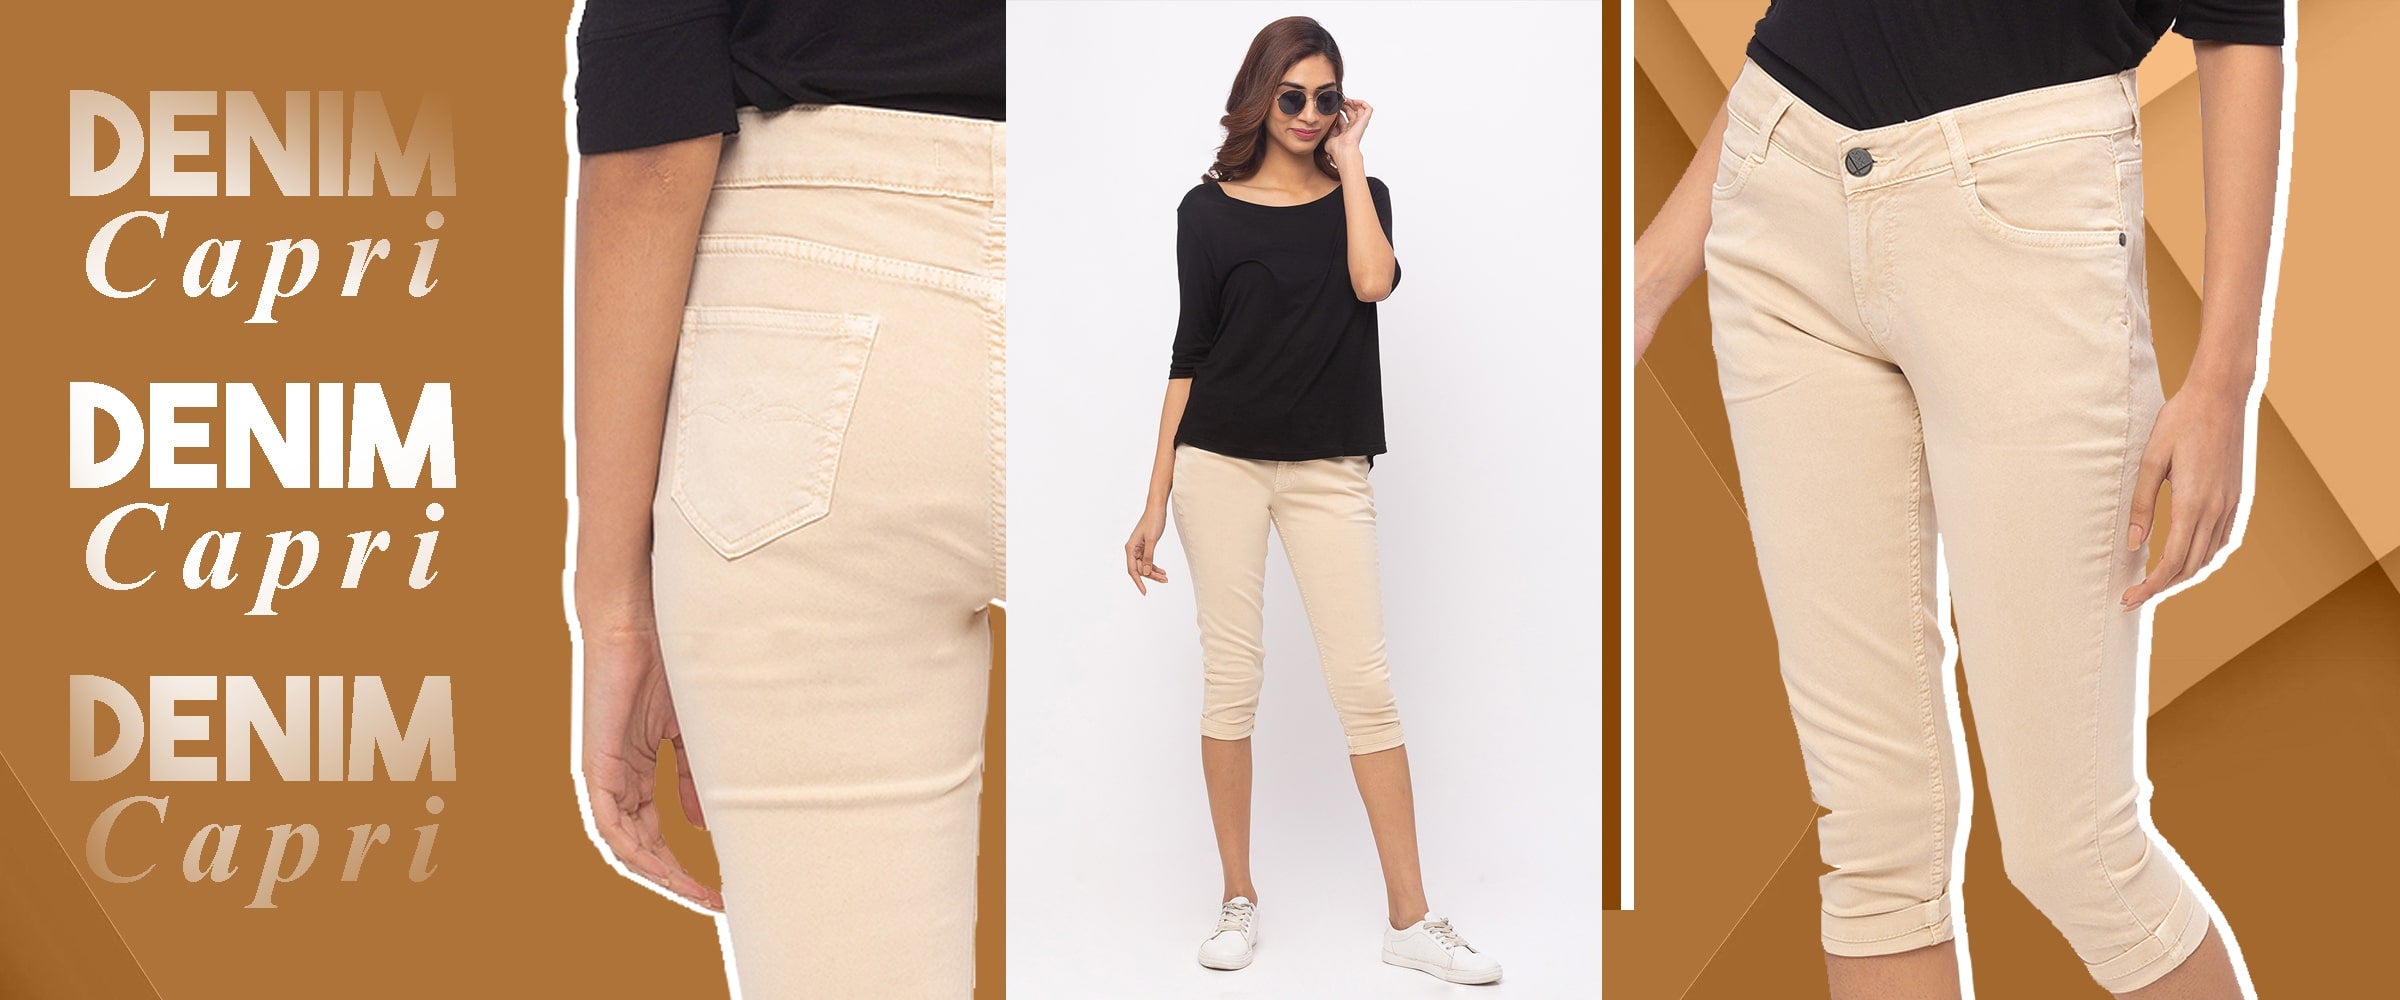 Ladies Fashion Trends For New Year: 7 Comfortable Capri Trousers for ladies